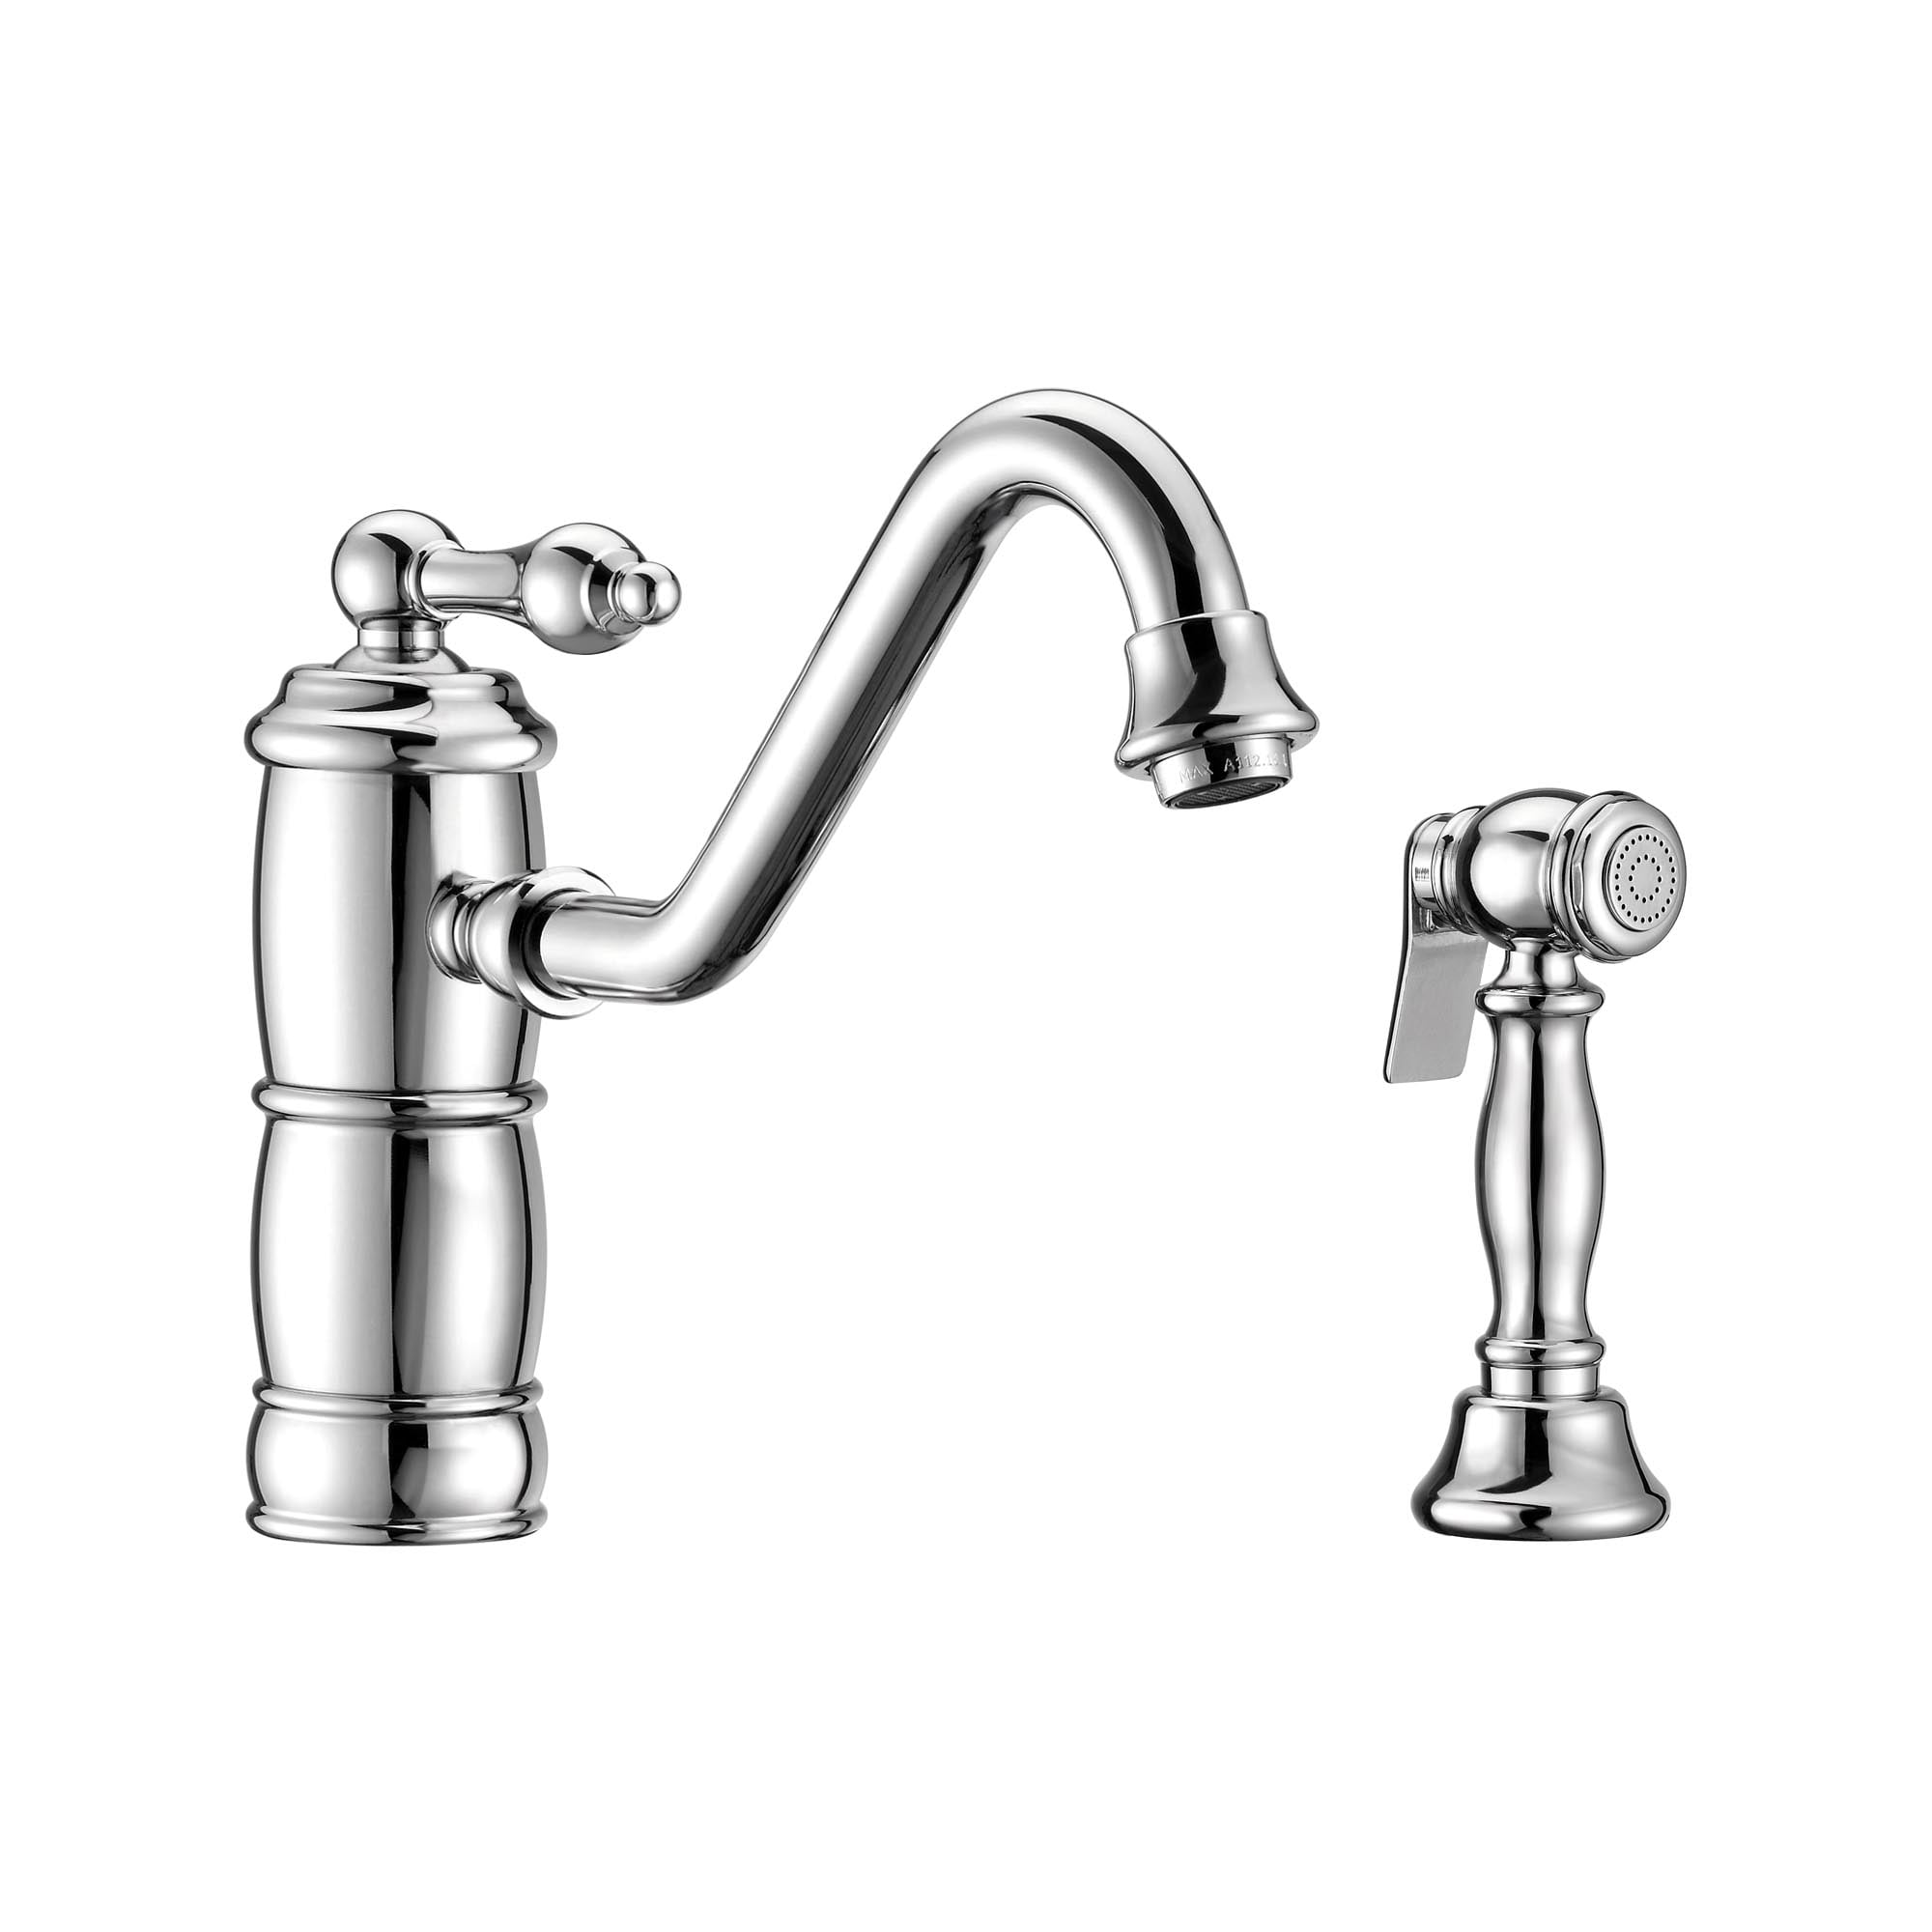 Whktsl3-2200-nt-c Vintage Iii Plus Single-lever Faucet With A Traditional Swivel Spout - Polished Chrome